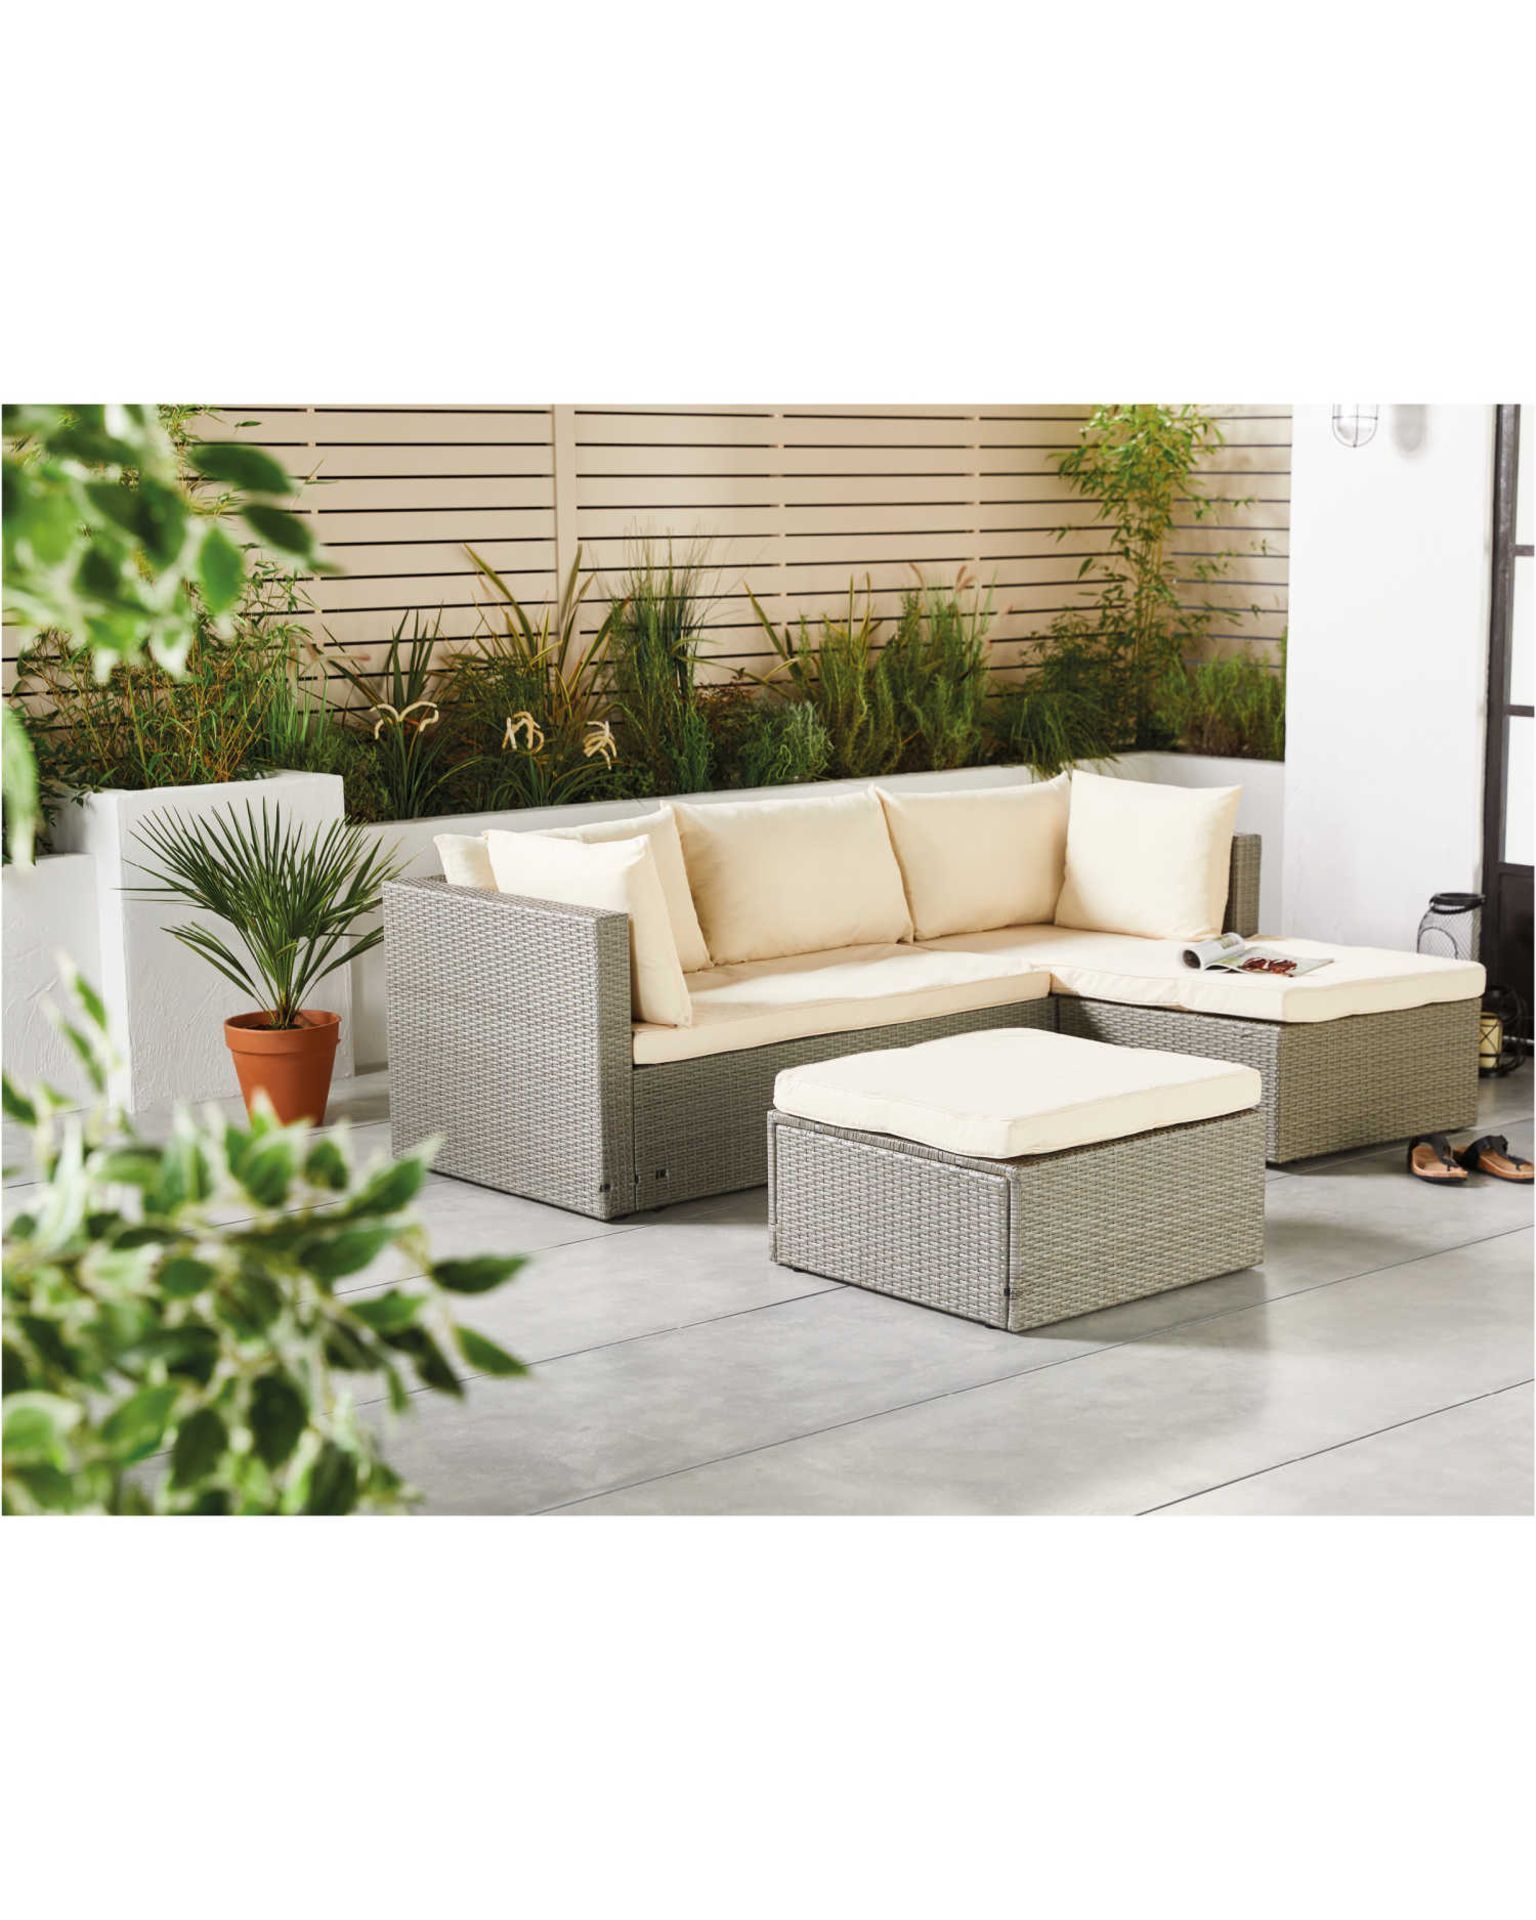 New & Boxed Luxury Grey & Cream Corner Sofa Set. Soak in the sun and feel that summer breeze while